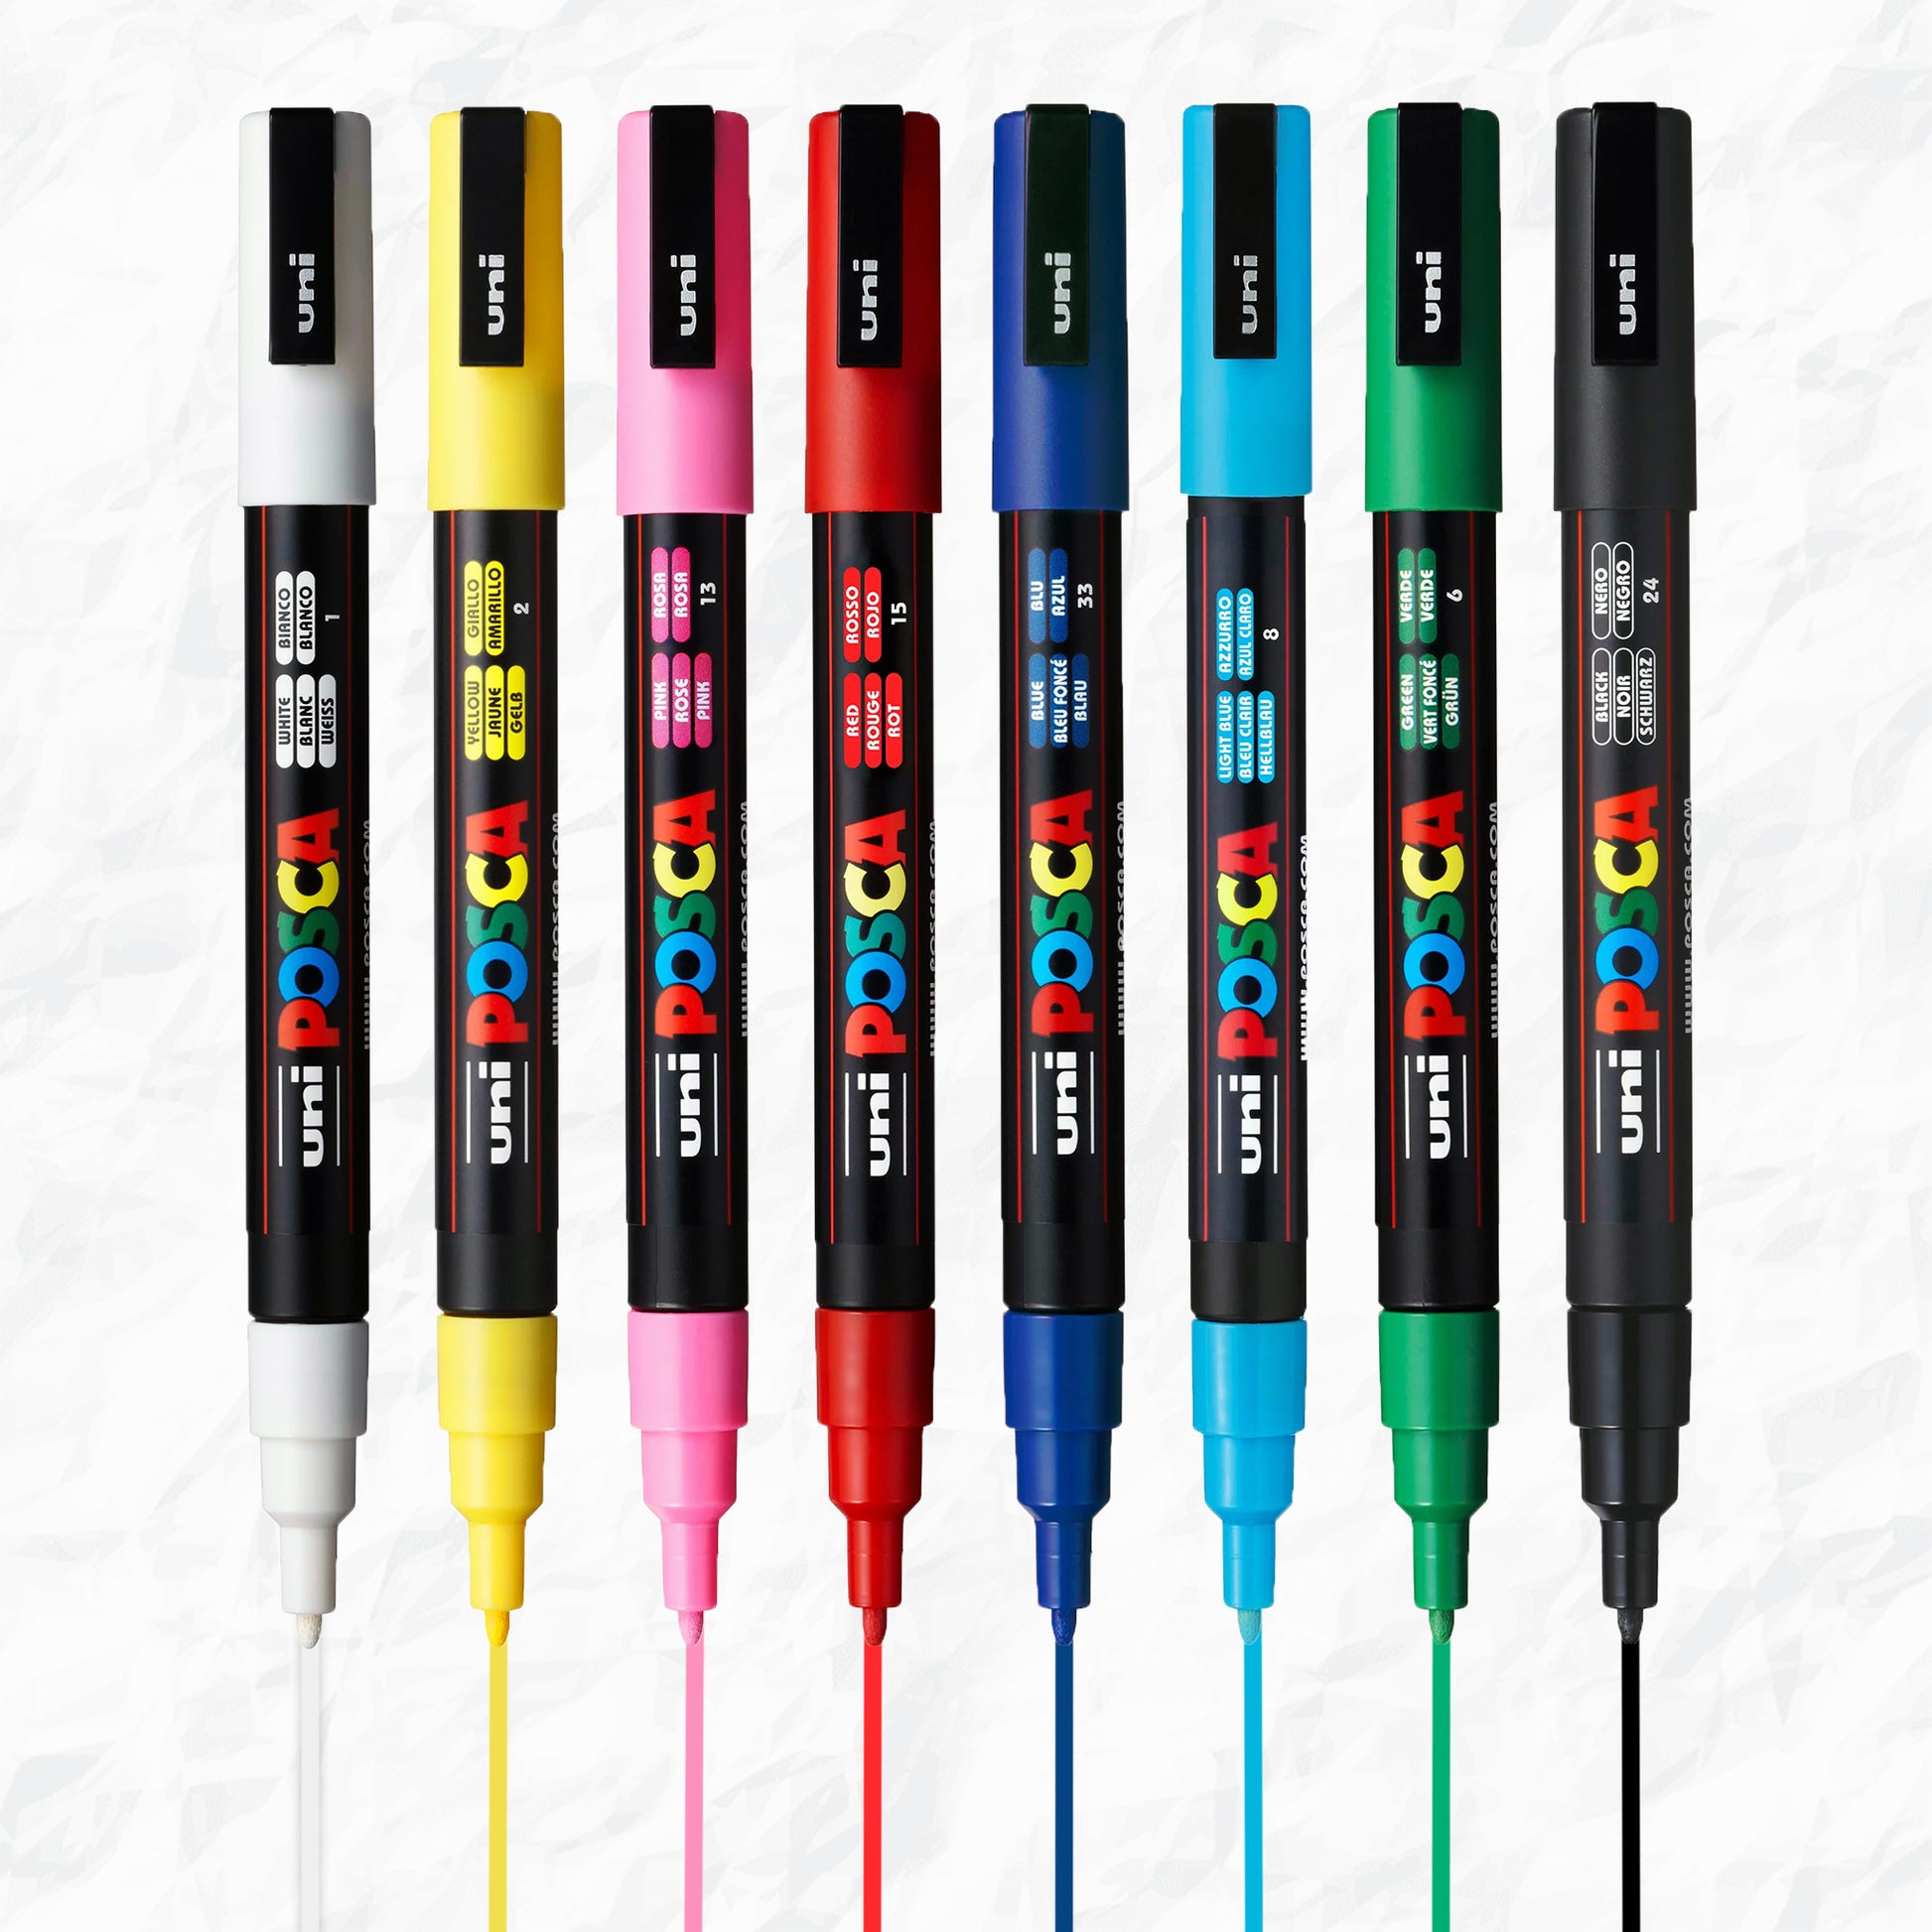 POSCA water-based acrylic paint marker 8 piece primary set